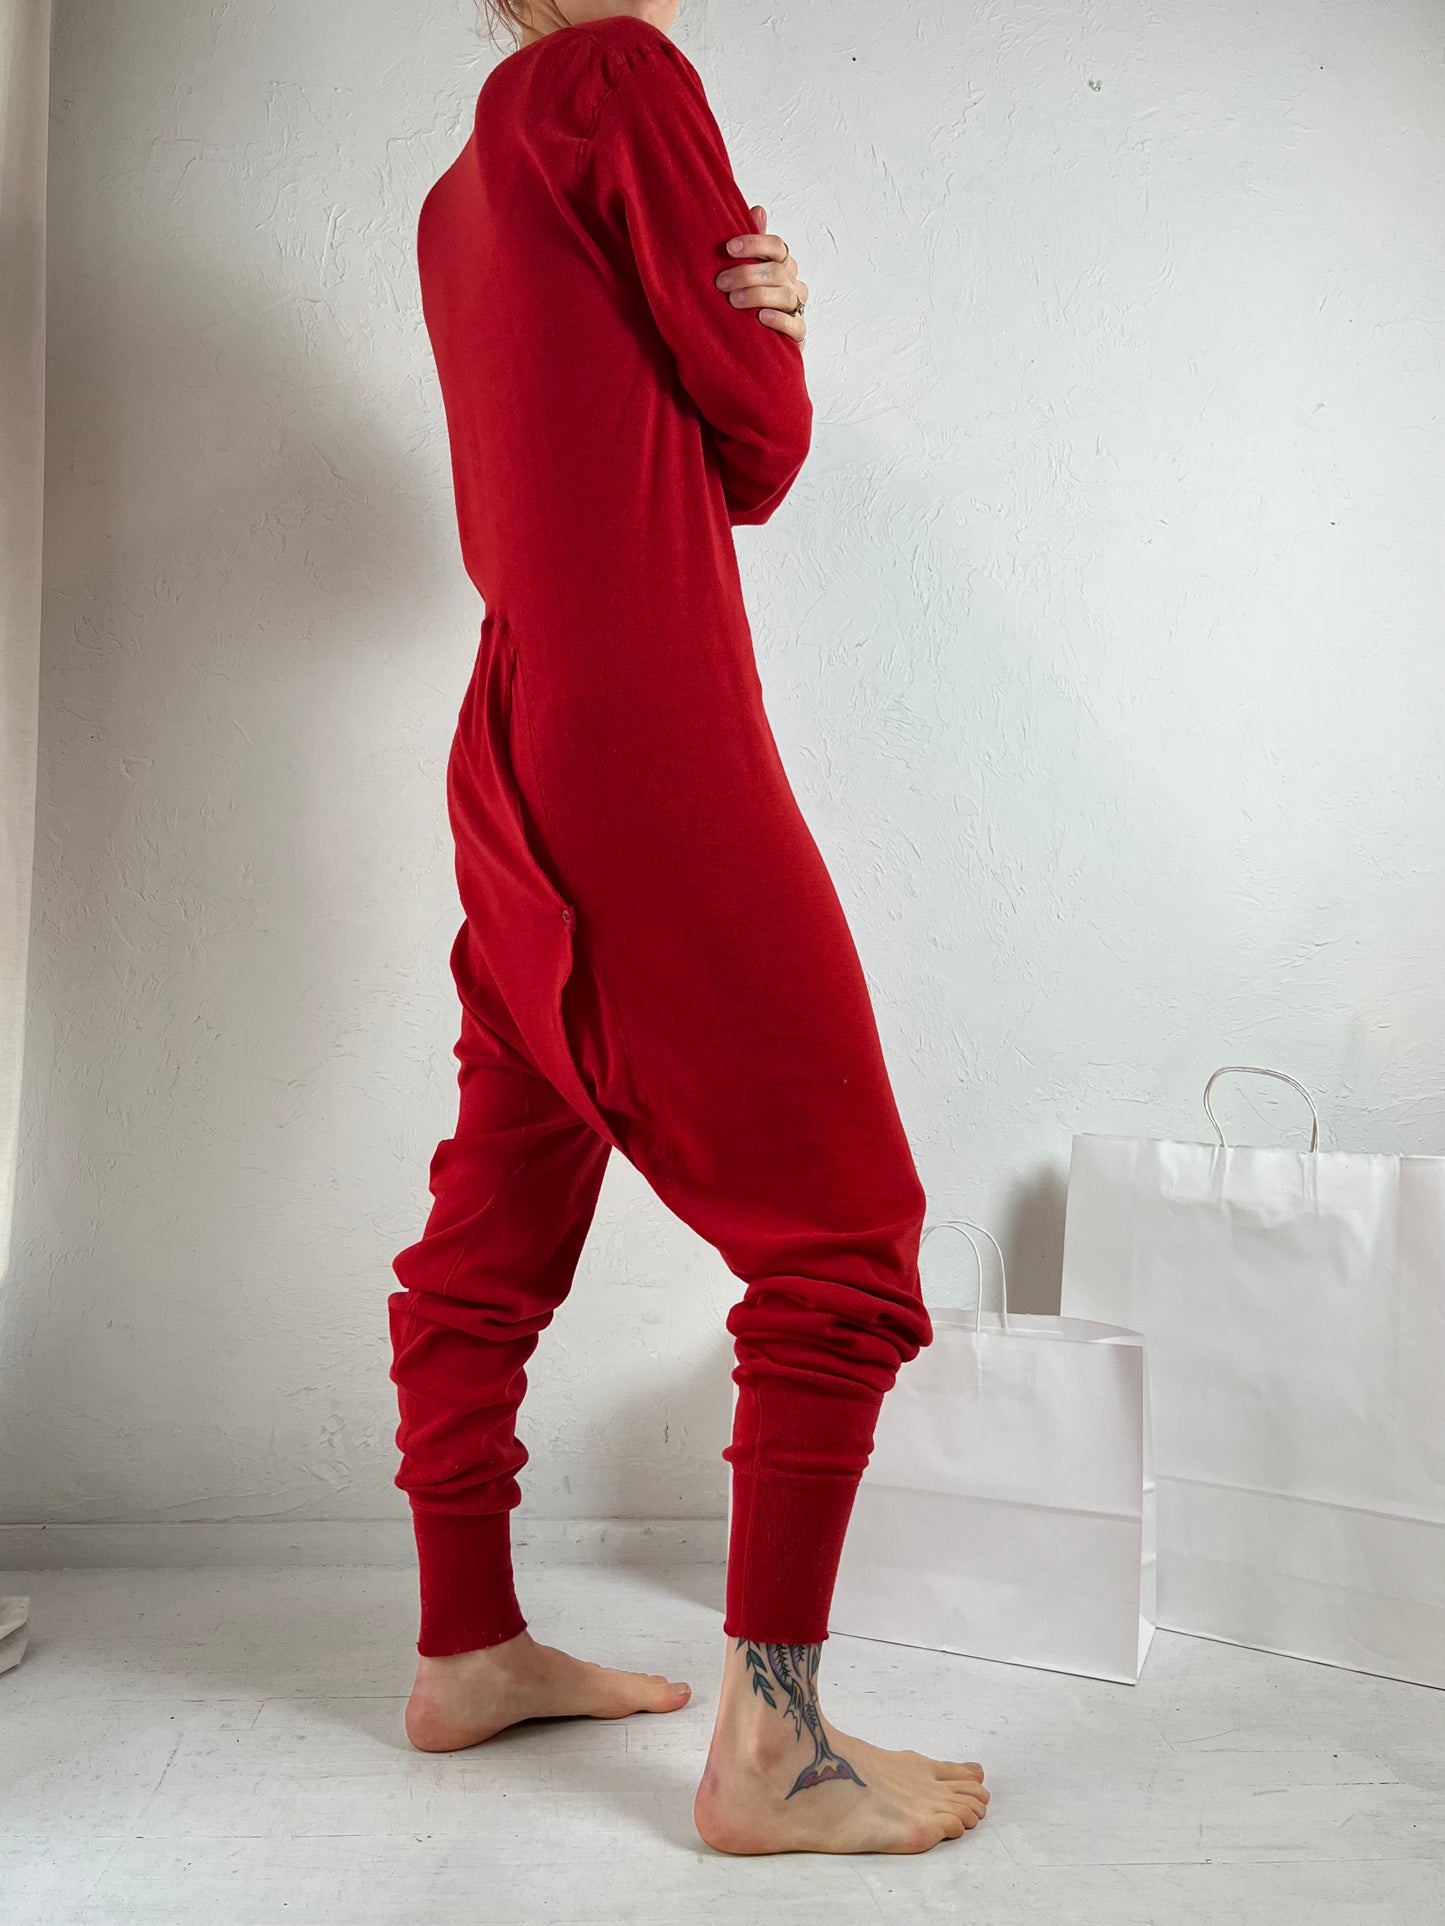 90s 'Stanfields' Red Long Underwear / Large